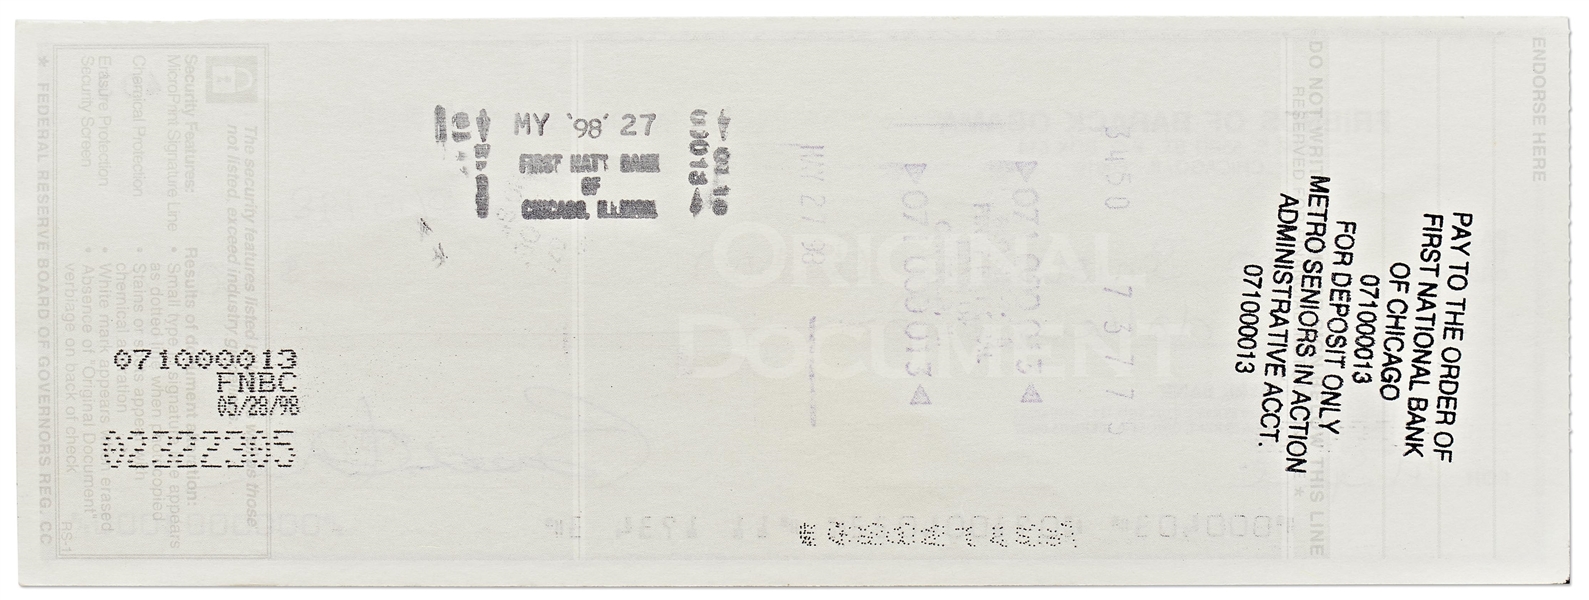 Scarce Check Signed by Barack Obama From the ''Friends of Barack Obama'' Bank Account